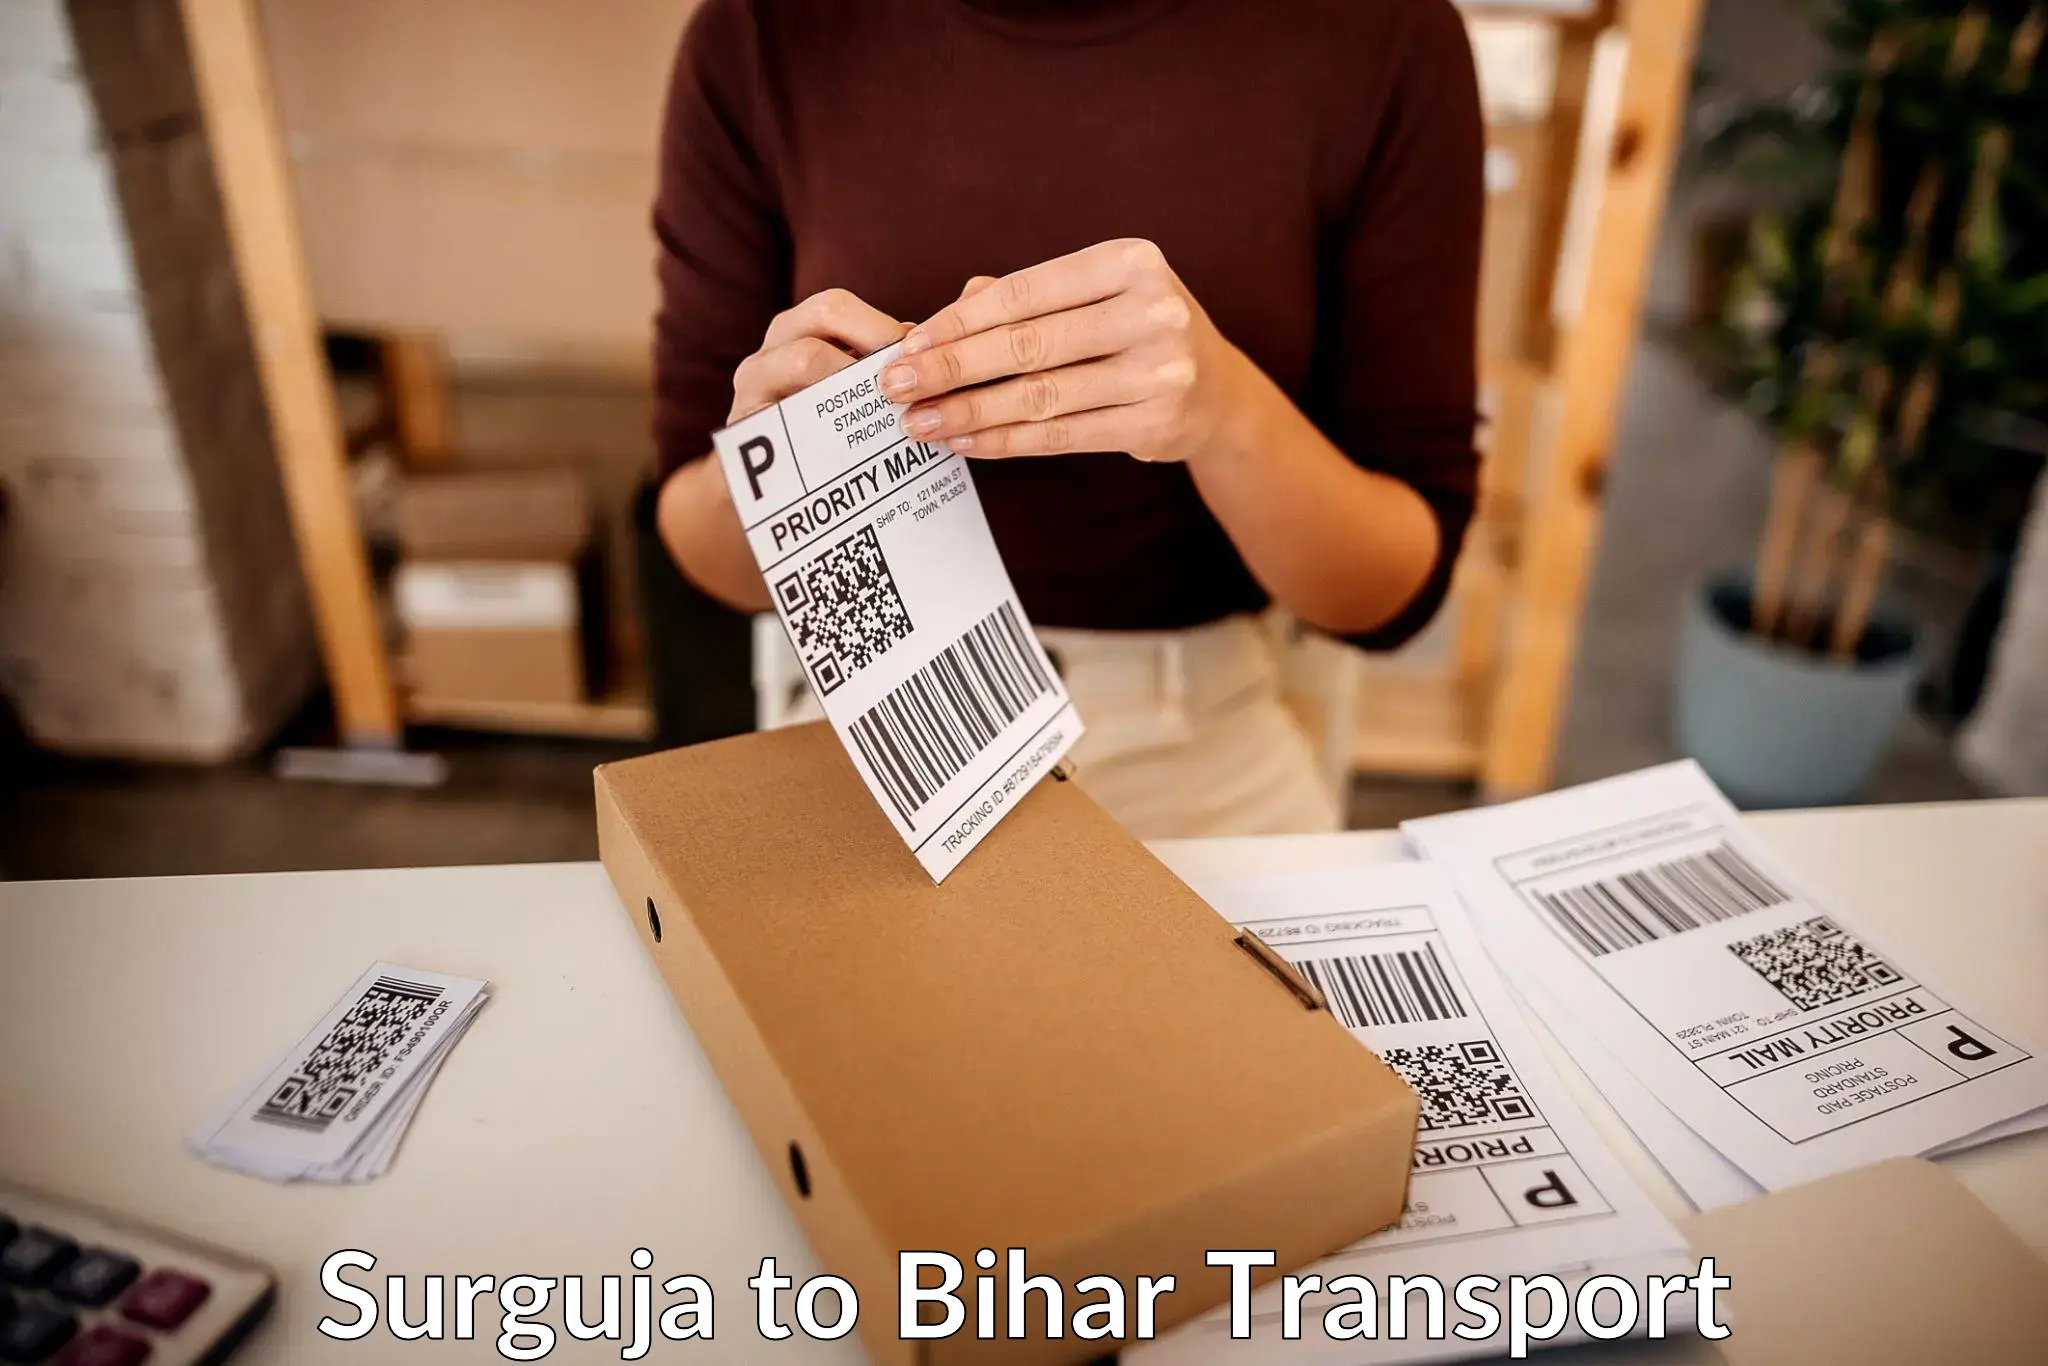 Container transport service Surguja to Bagaha